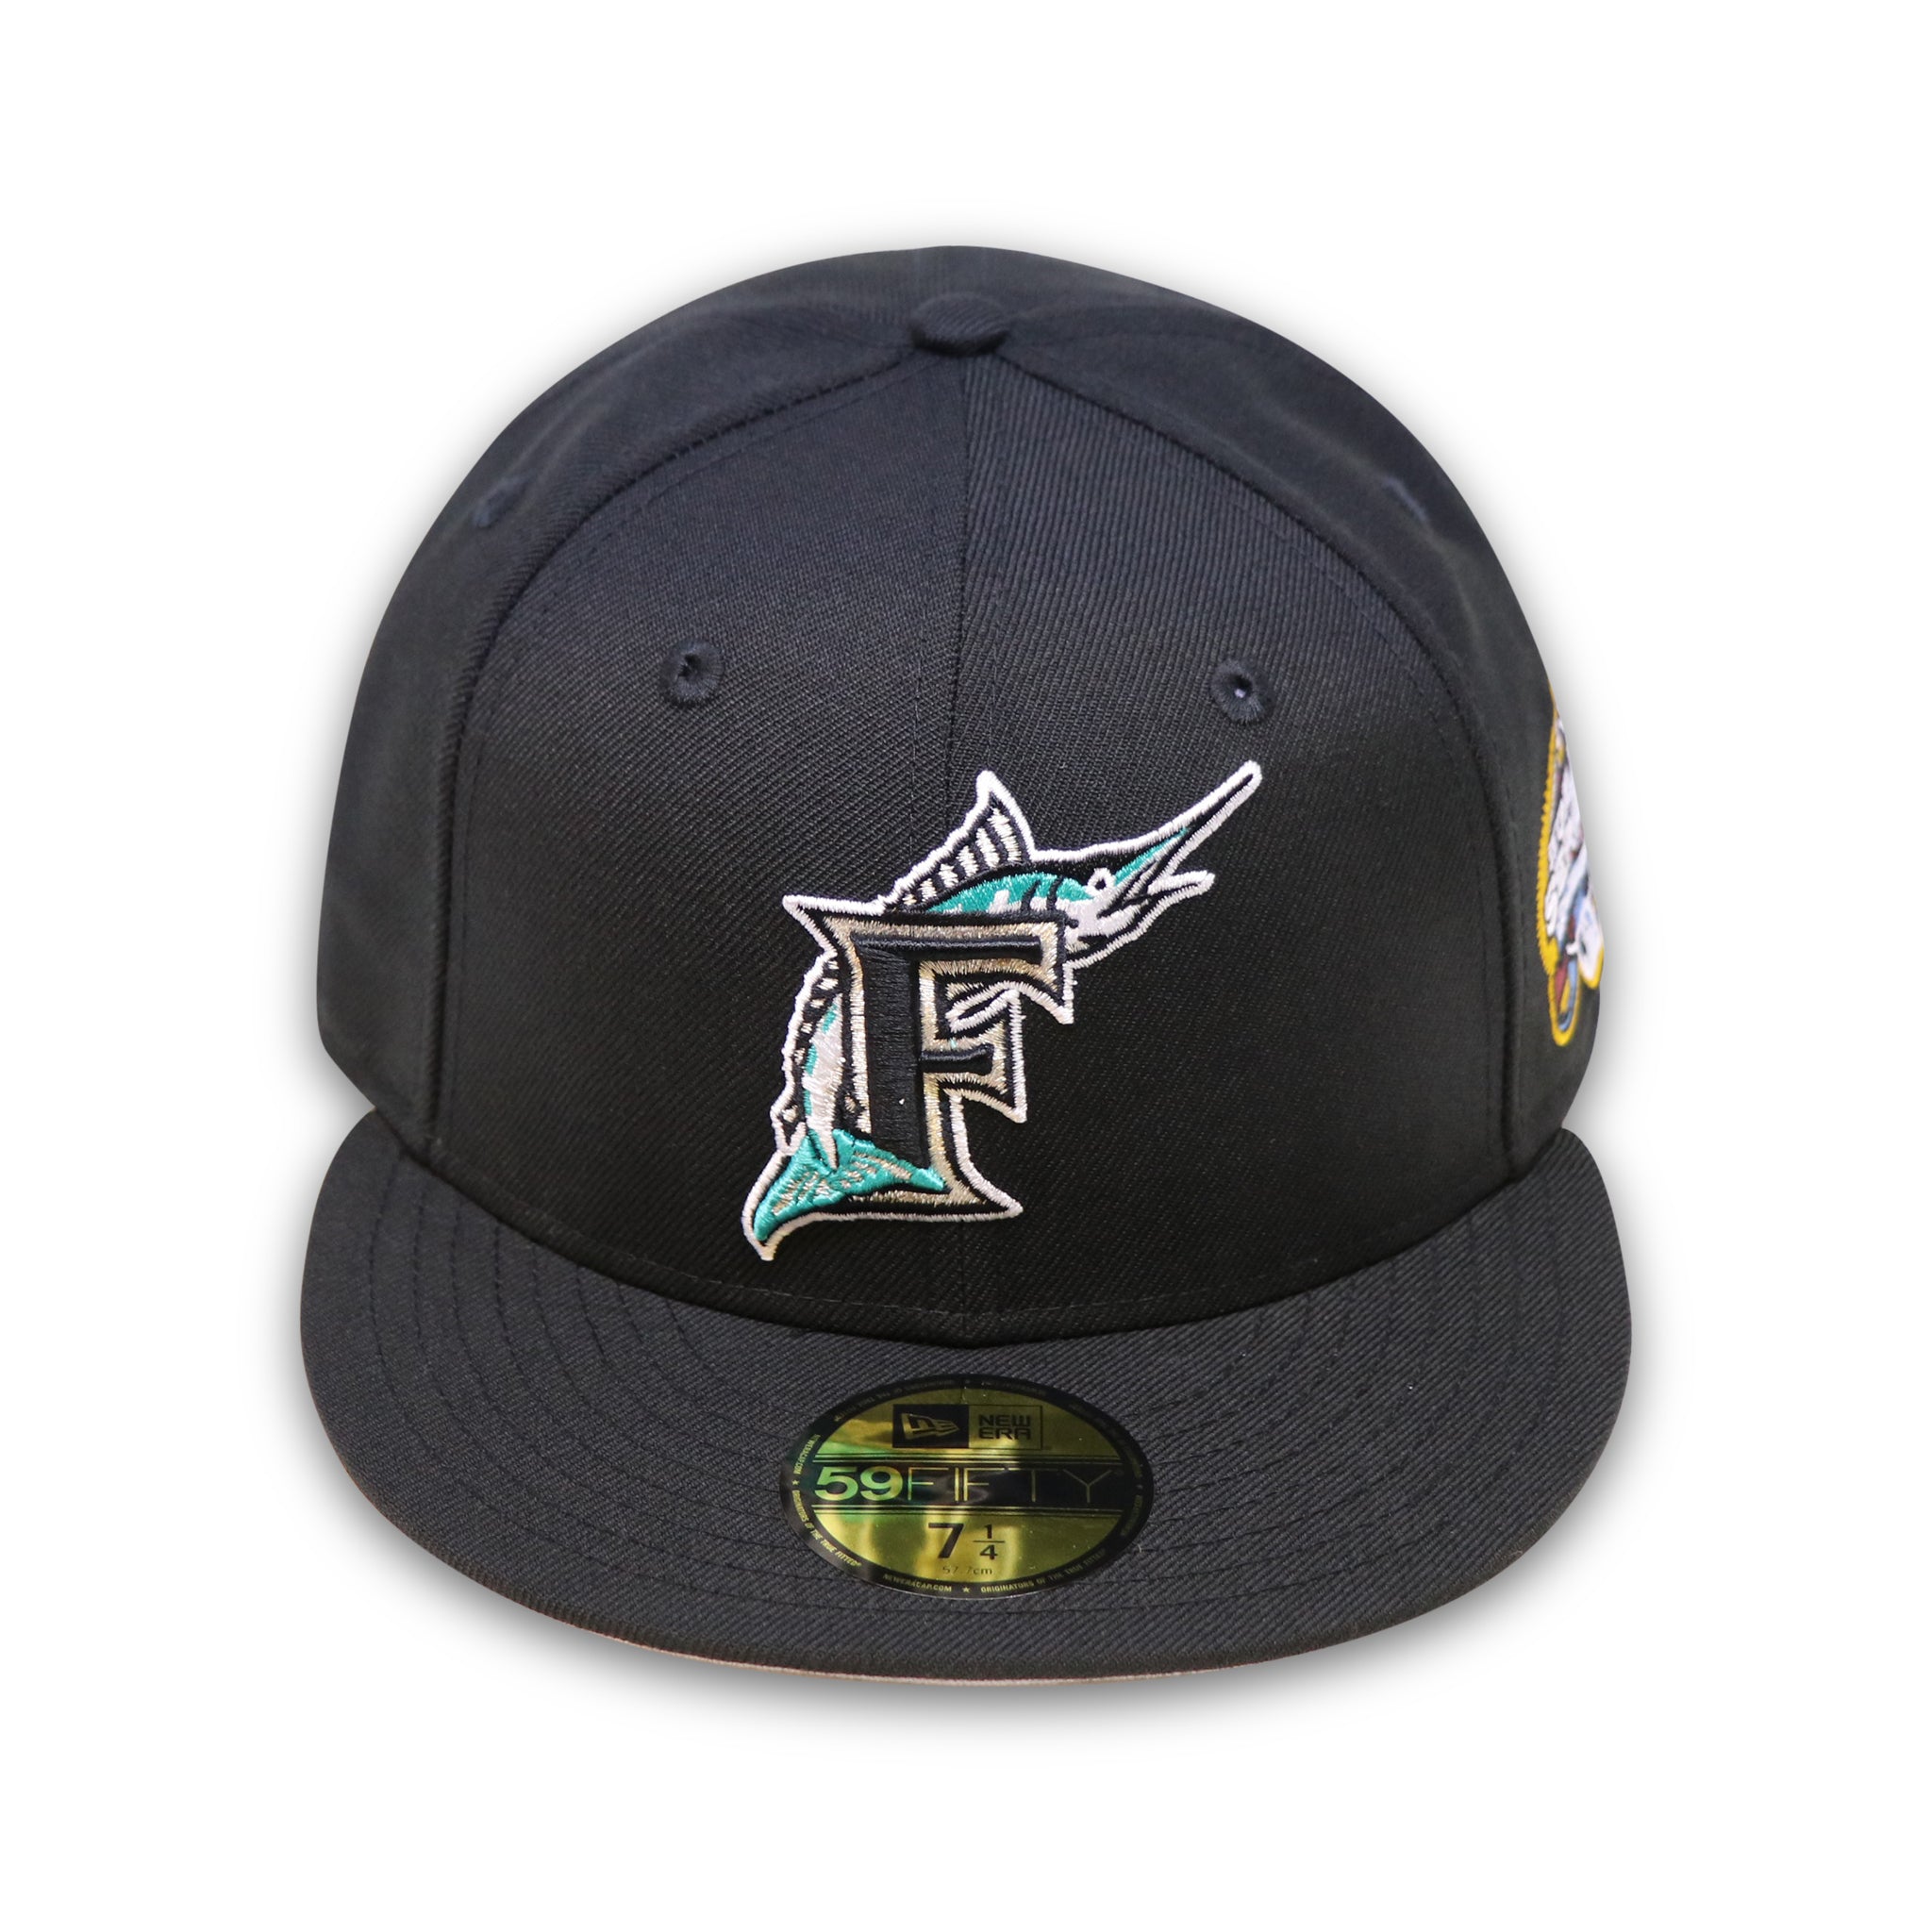 FLORIDA MARLINS (BLACK) (2003 WORLDSERIES) NEW ERA 59FIFTY FITTED